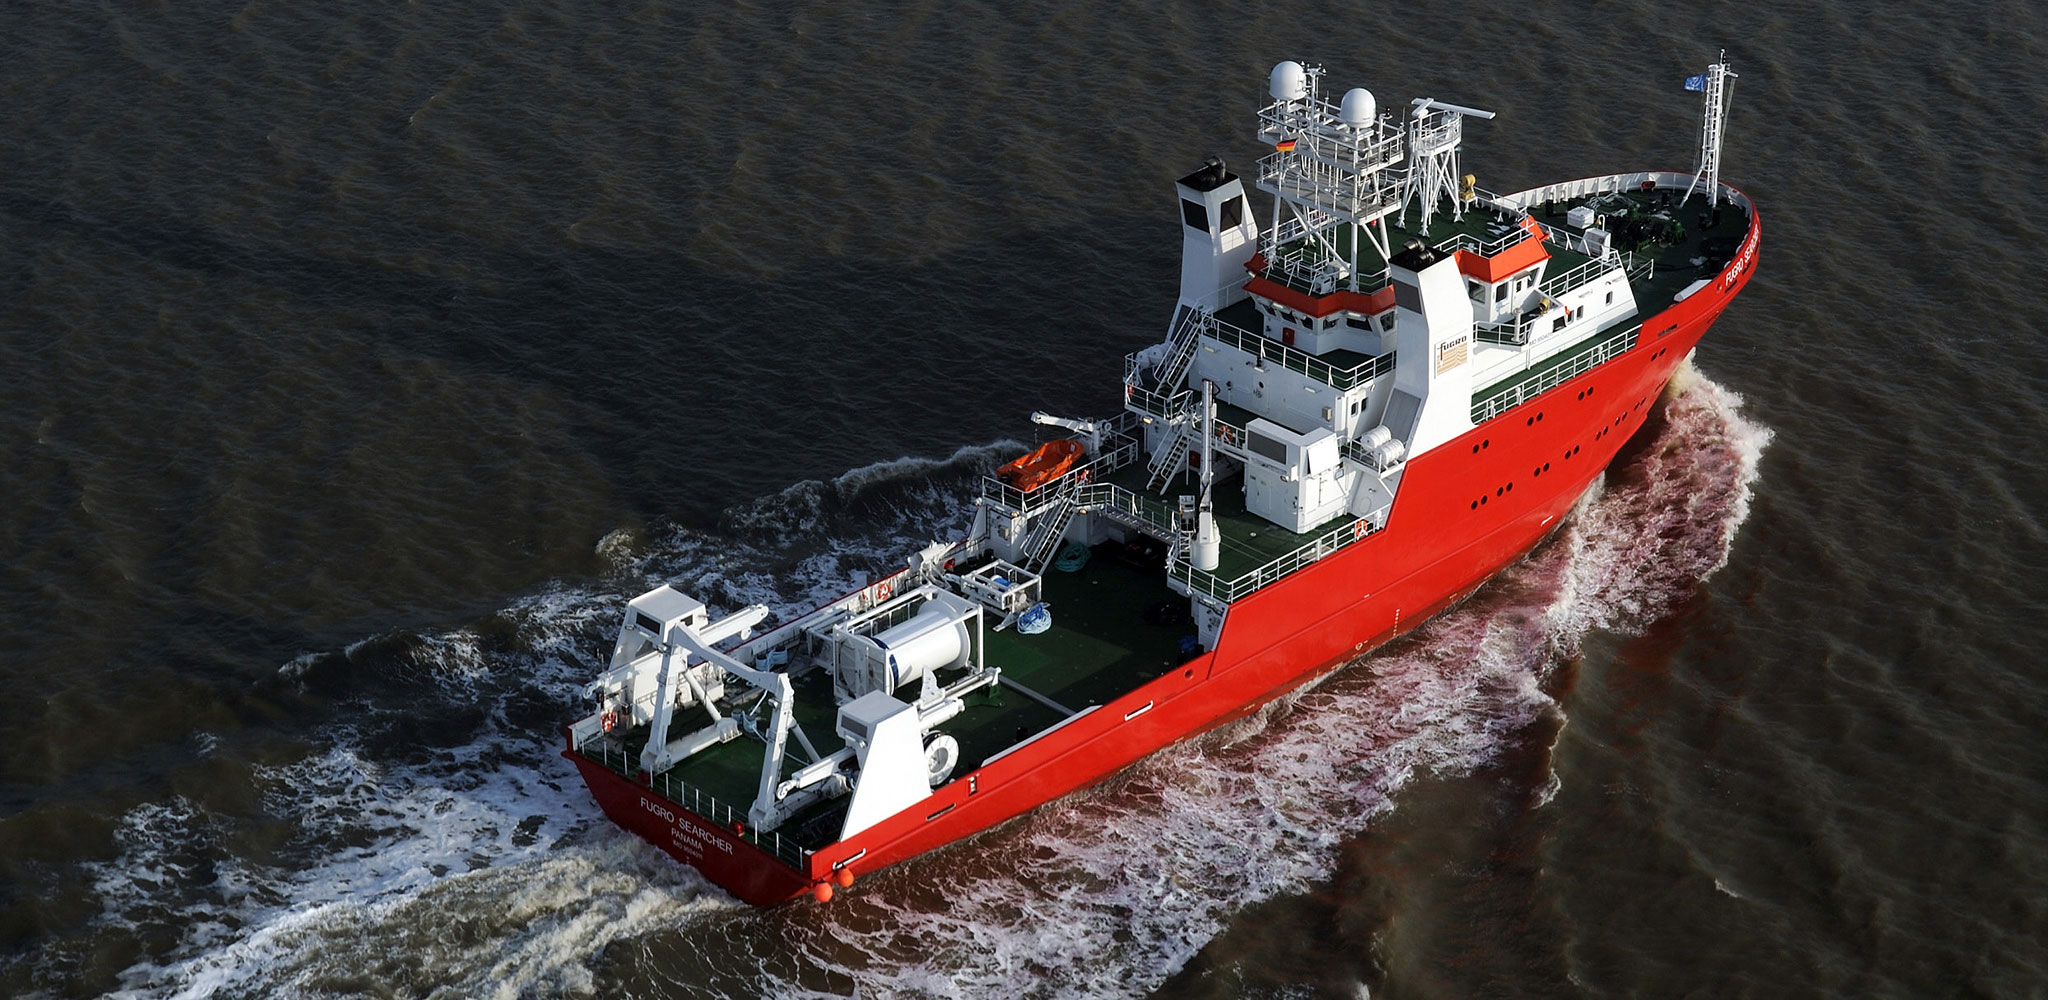 A specialist geophysical survey vessel. Image courtesy of Fugro. All rights reserved.